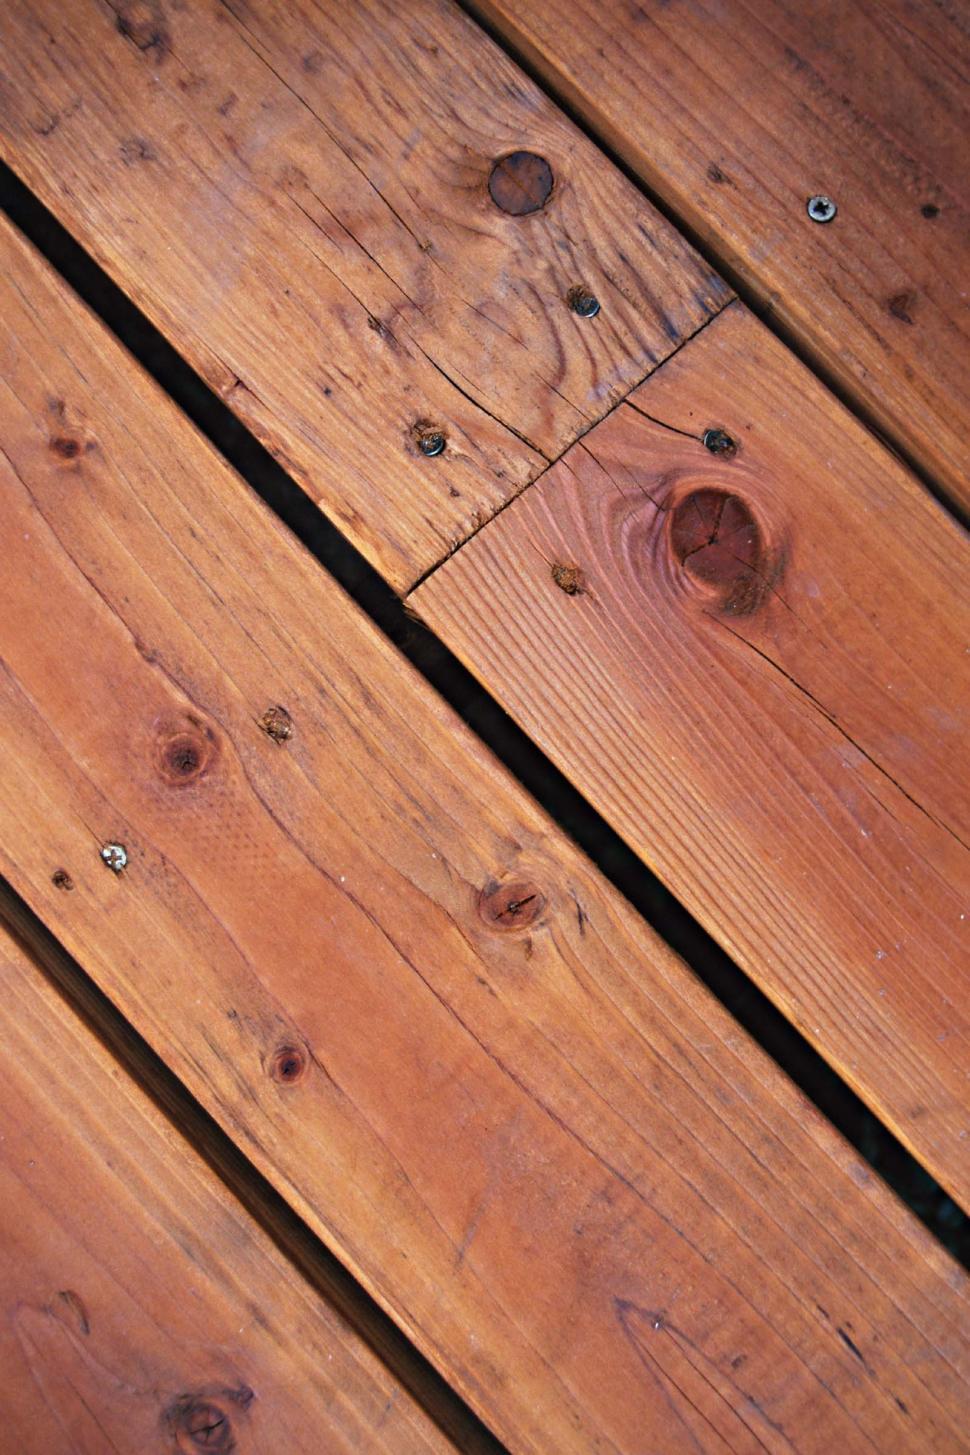 Free Image of Close Up of Wooden Bench With Nails 